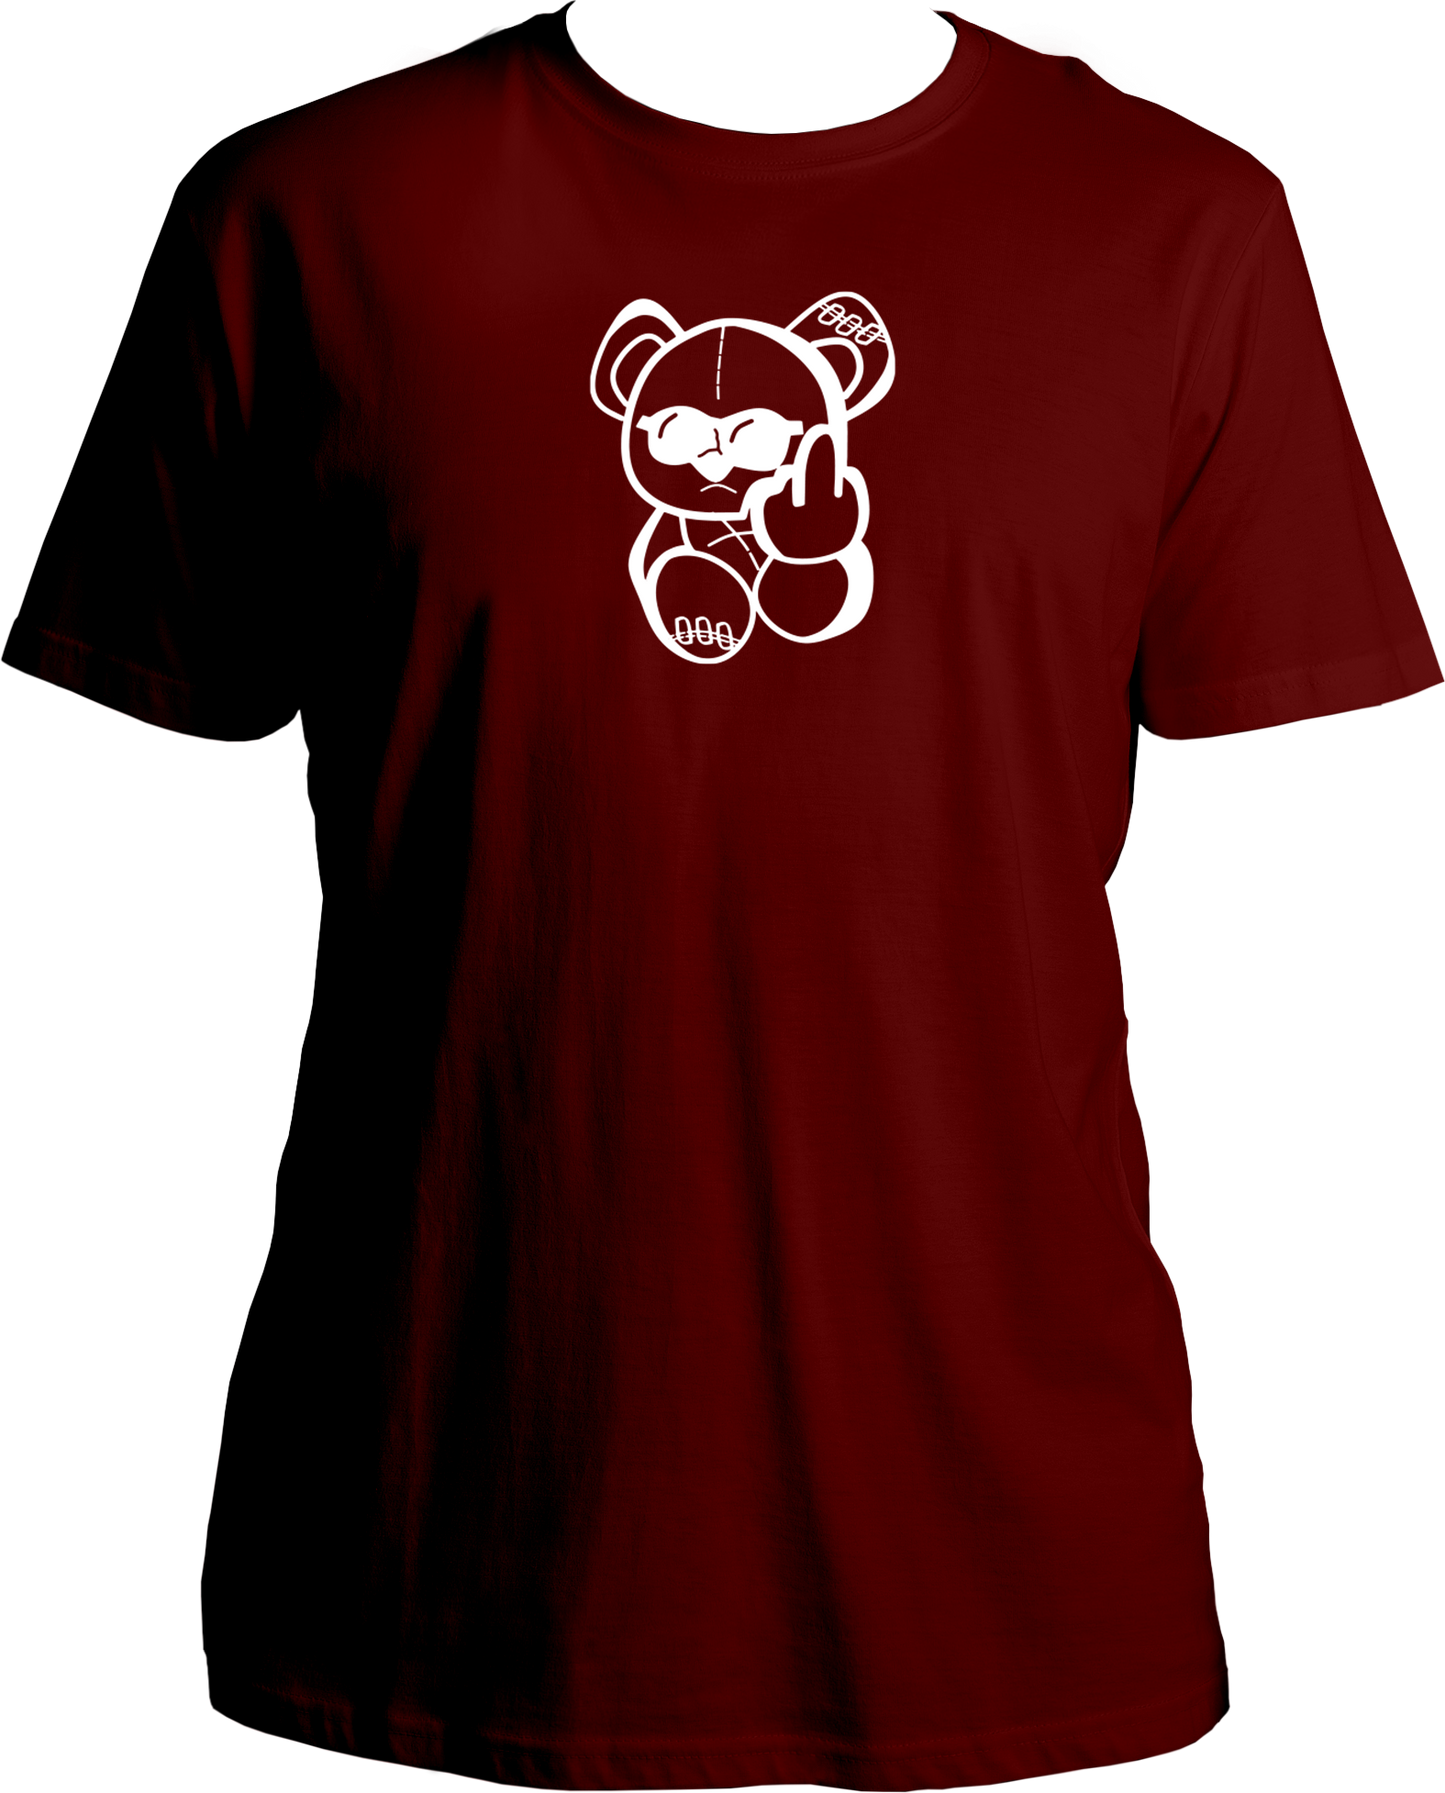 Step up your style game with the KR$NA Trendy Teddy Unisex Cotton T-Shirts, featuring the iconic teddy bear design that every fan loves. This T-shirt blends the playful yet edgy vibe of KR$NA’s music, making it a must-have for all dedicated followers and hip-hop enthusiasts.